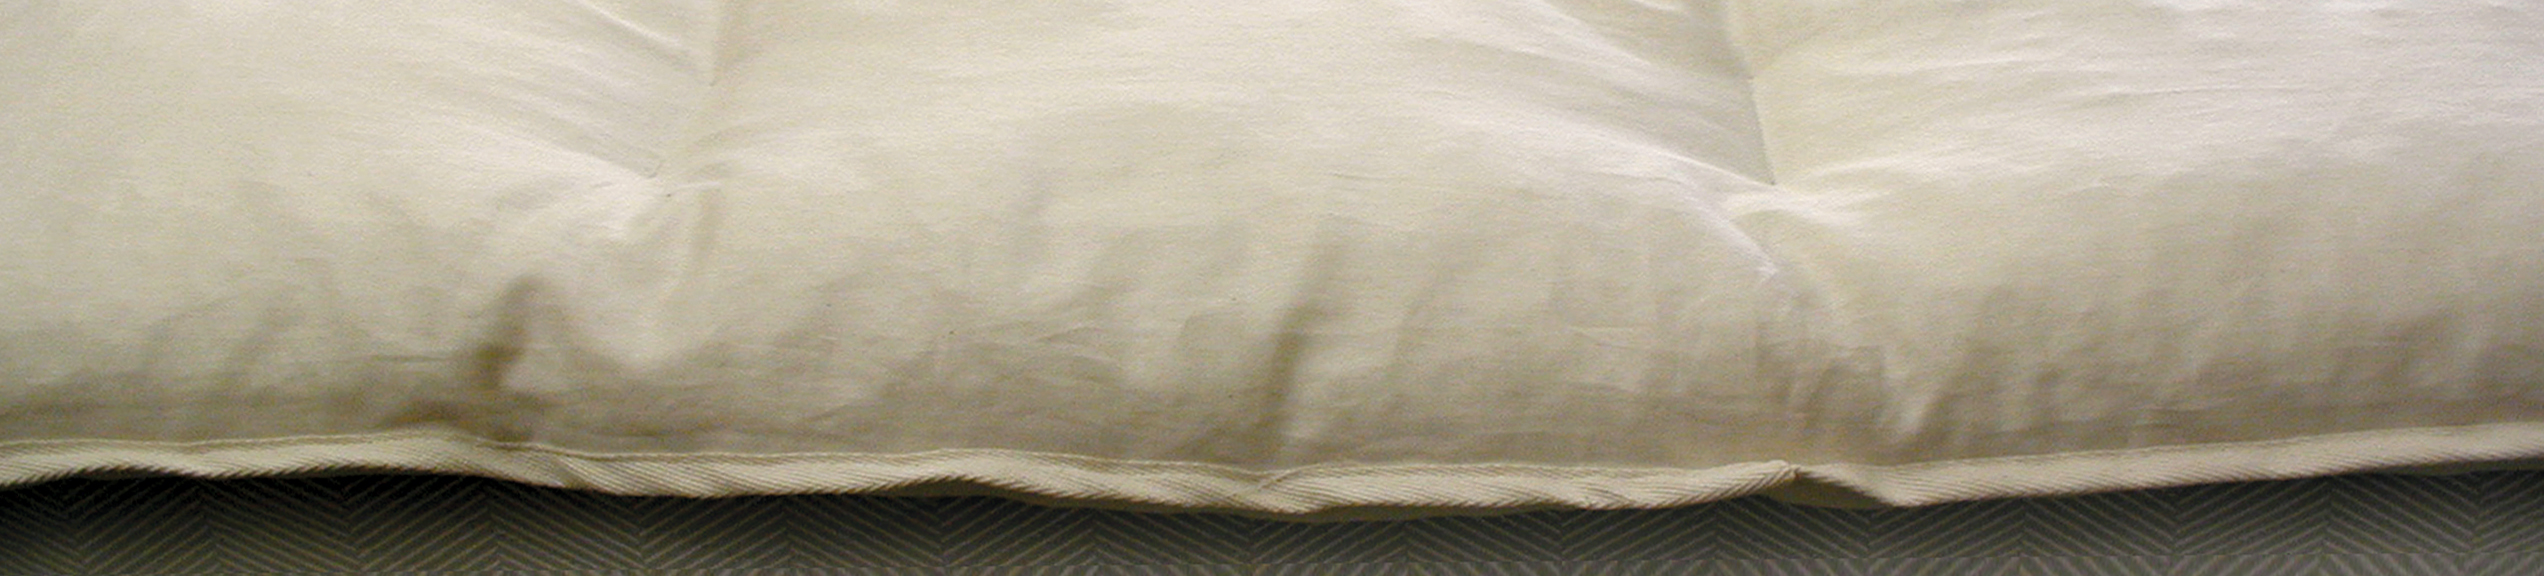 organic mattress pads and toppers